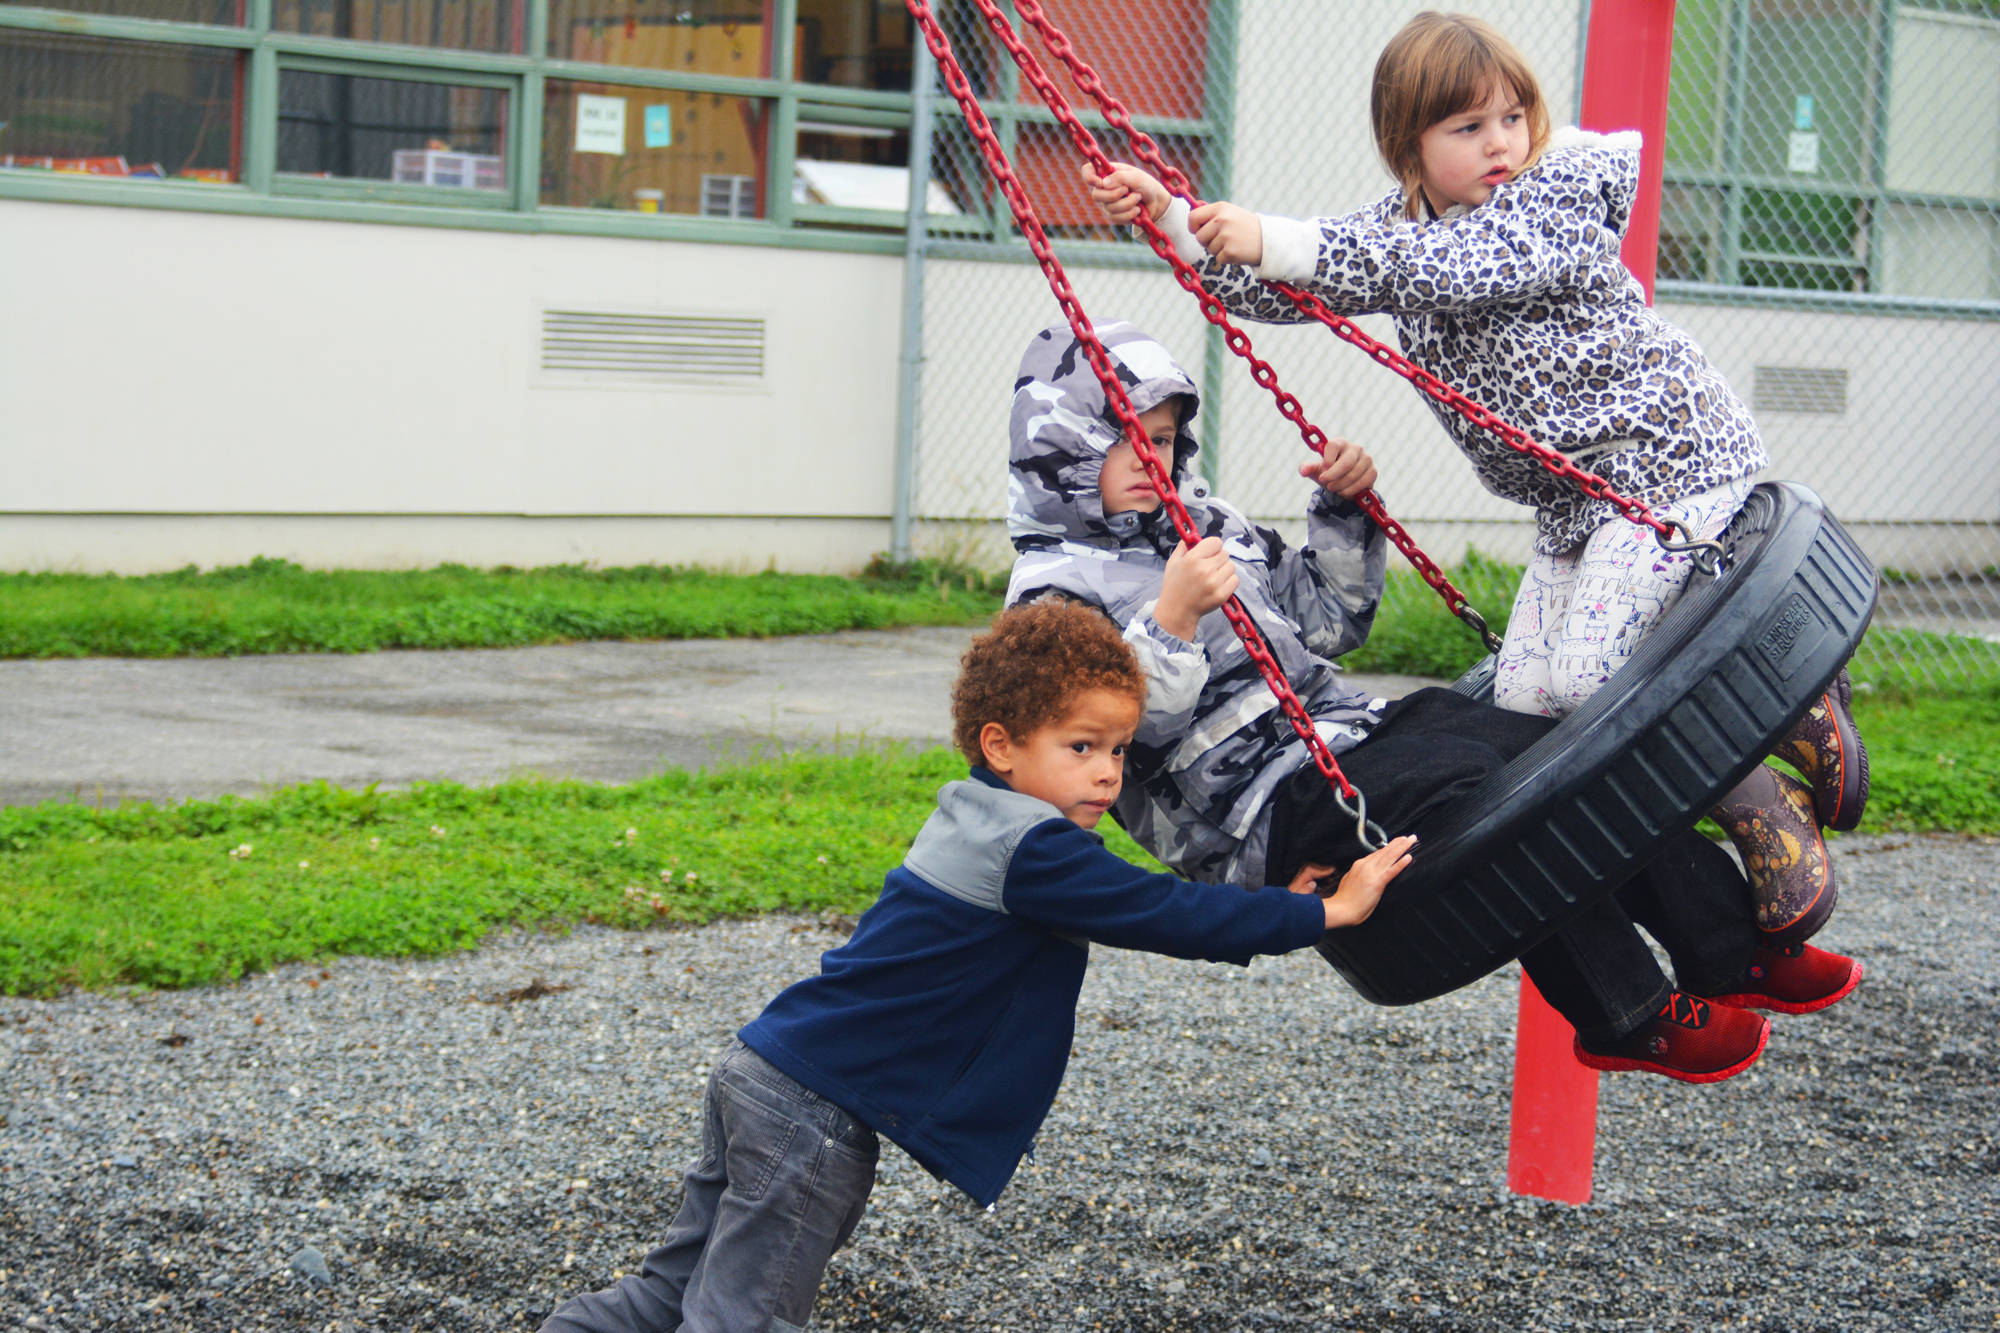 Elijah Williams pushes Adrian Reutov and Autumn Read on a swing during recess on the first day of school Tuesday, Aug. 22, 2017 at Paul Banks Elementary in Homer, Alaska. (Photo by Megan Pacer/Homer News)